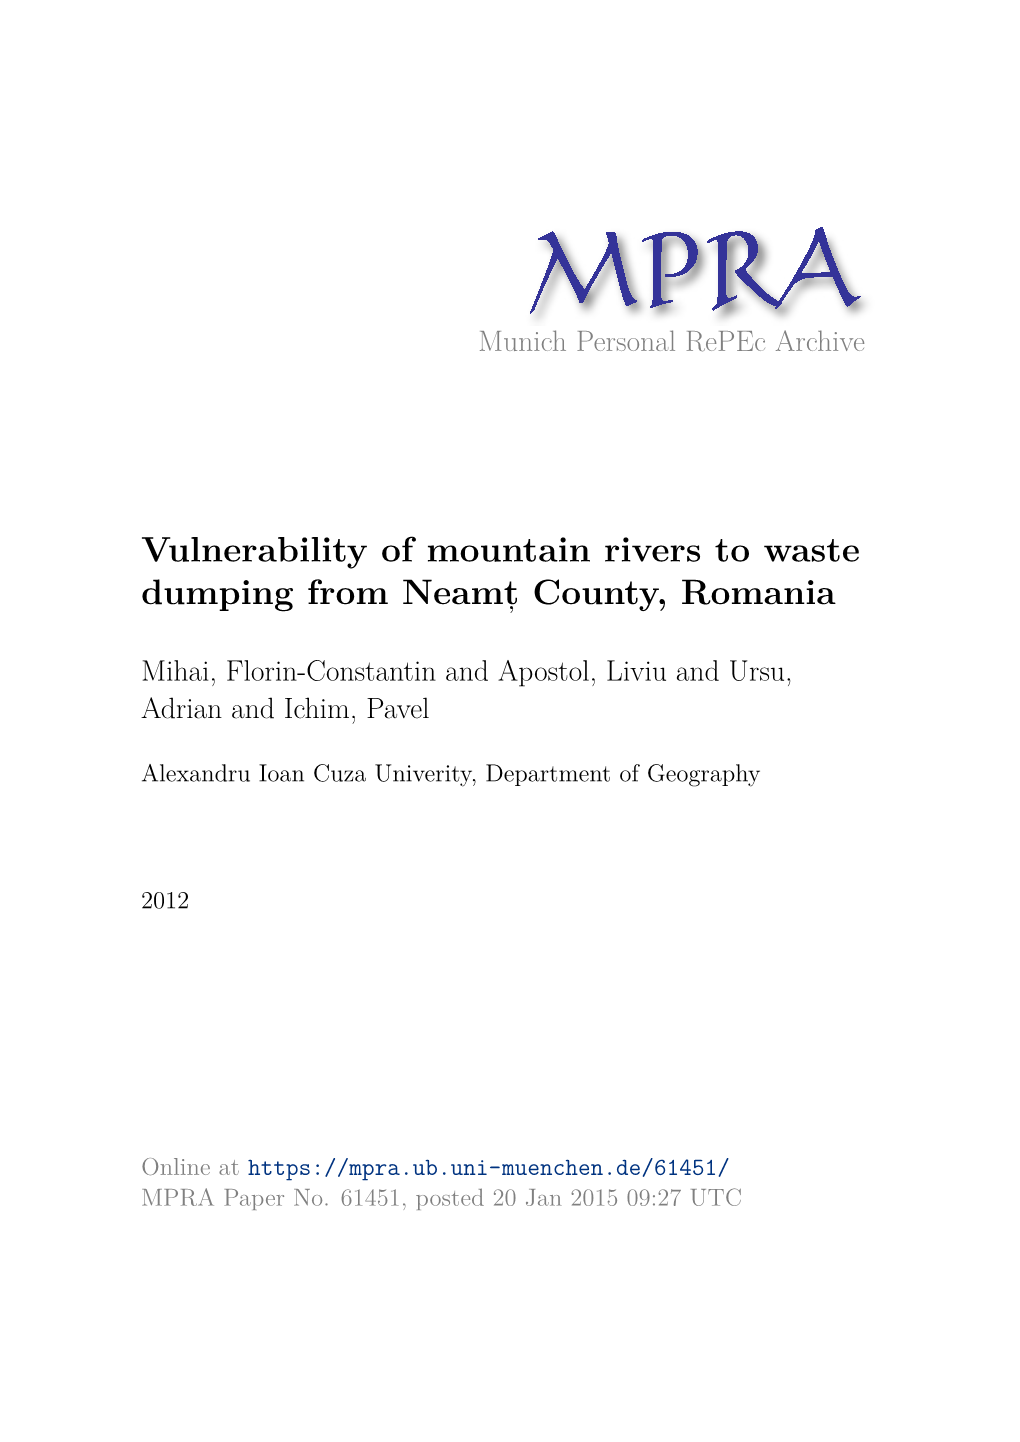 Vulnerability of Mountain Rivers to Waste Dumping from Neamt, County, Romania